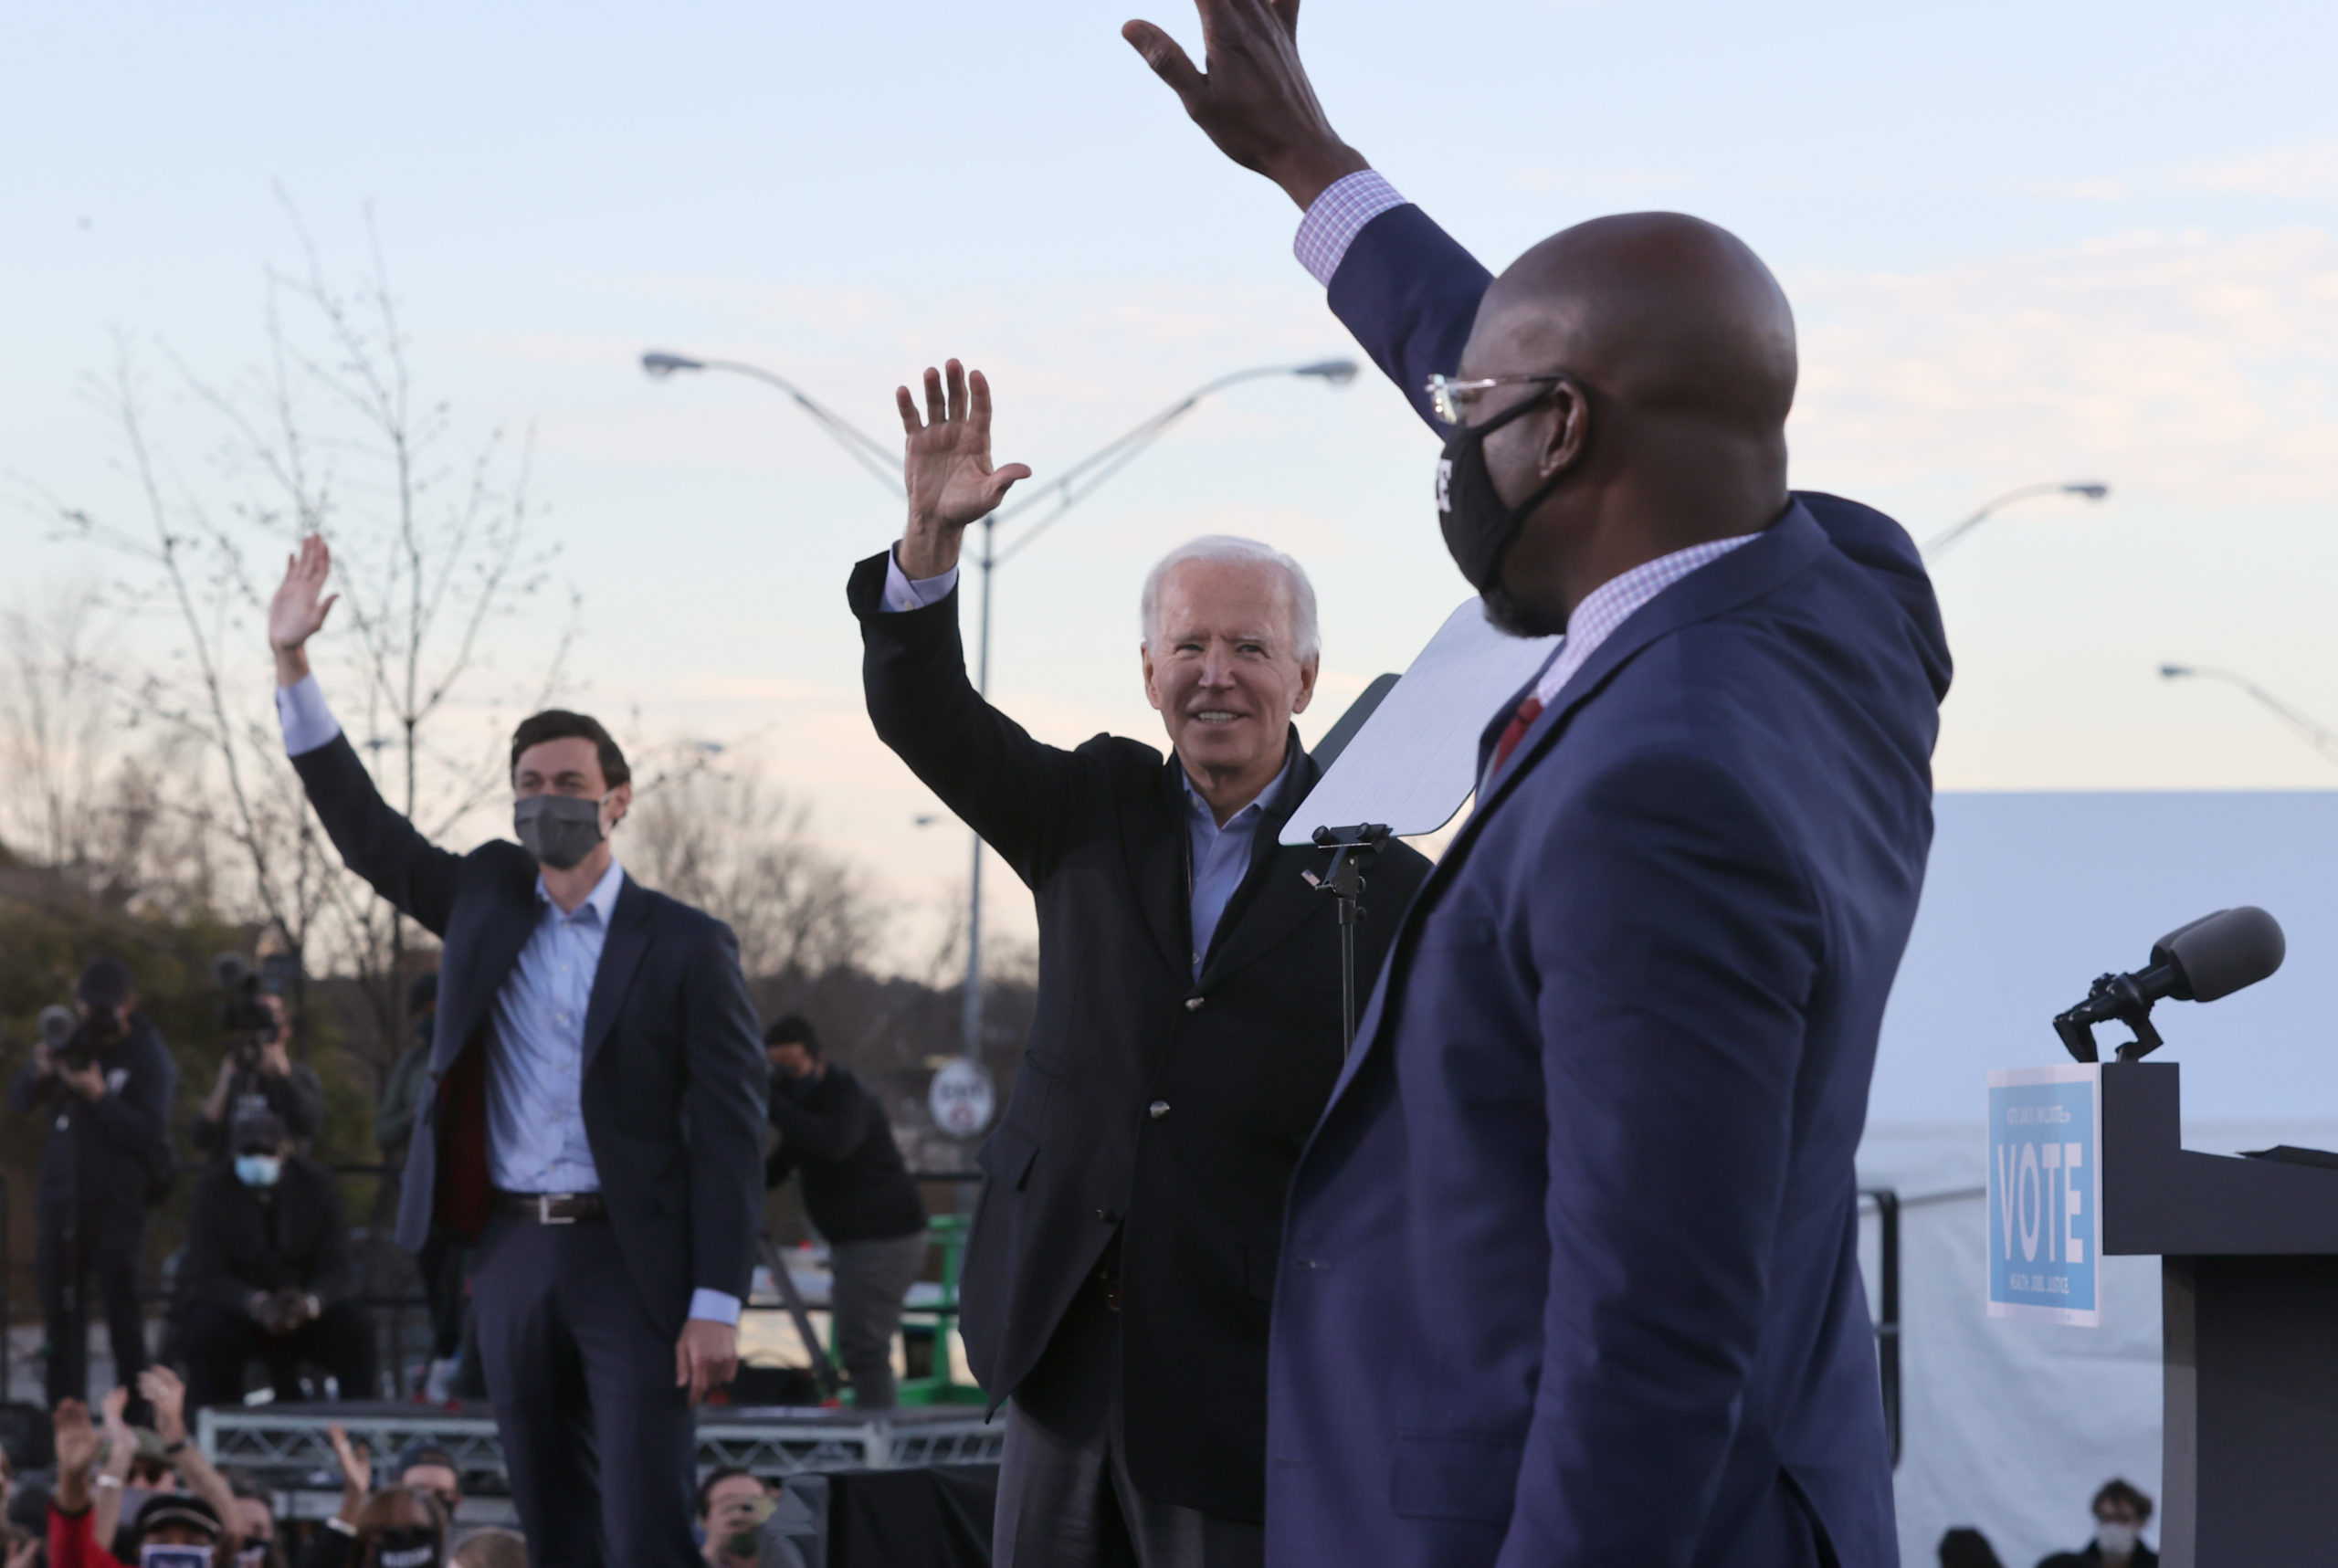 President-elect Joe Biden along with Jon Ossoff and Rev. Raphael Warnock greet supporters during a campaign rally Monday in Atlanta, Georgia. (Chip Somodevilla/Getty Images)